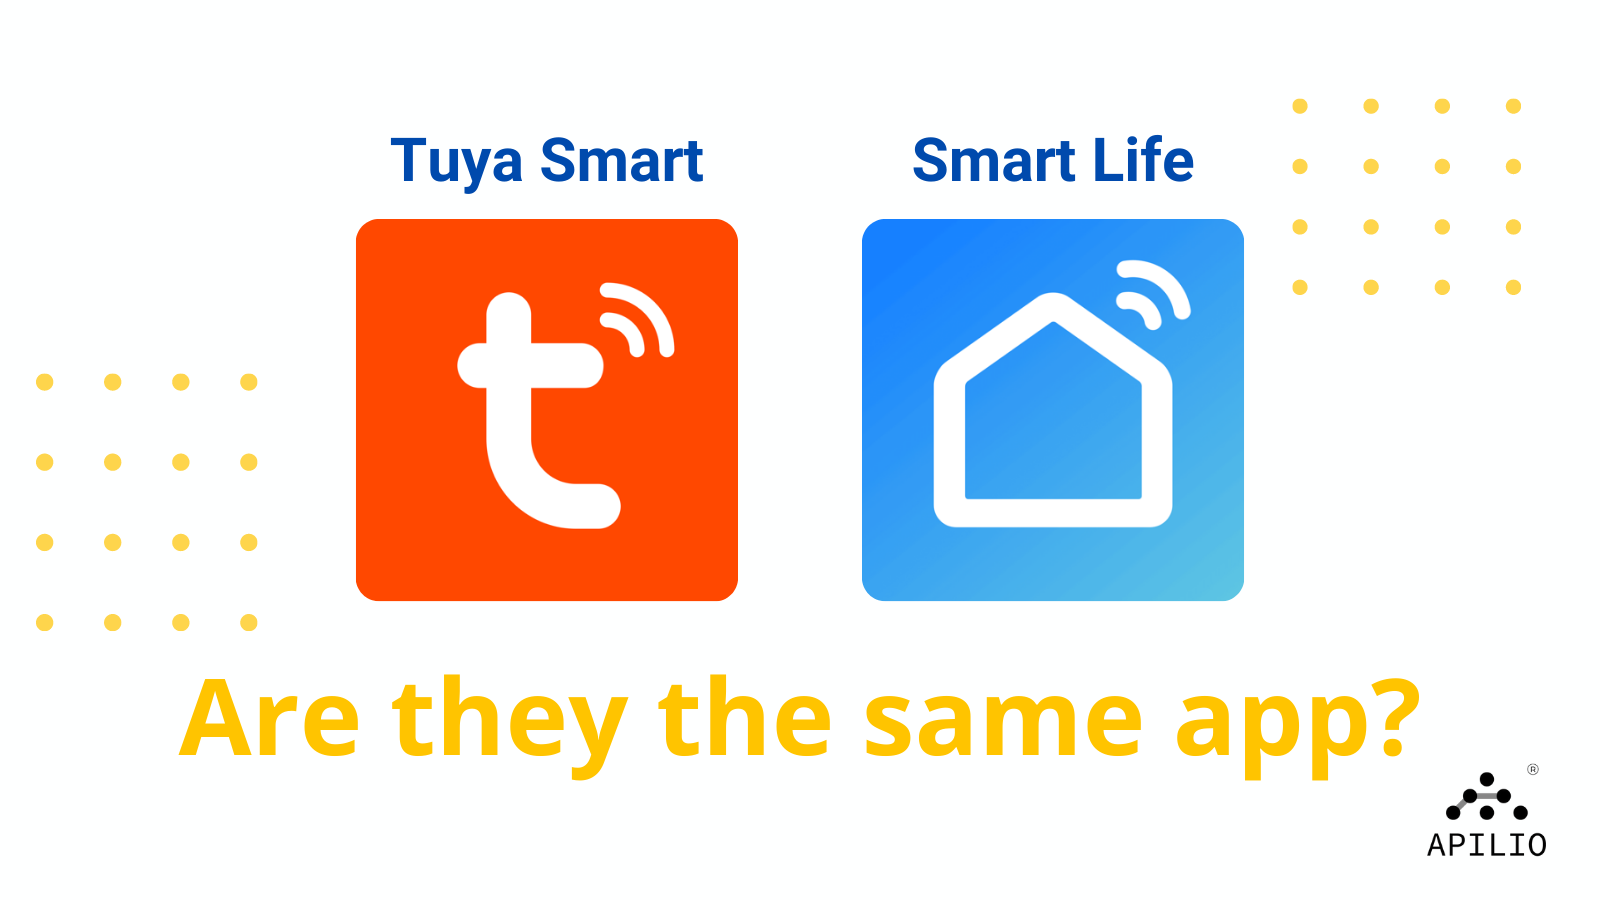 Tuya Smart vs Smart Life: what's the difference between these apps